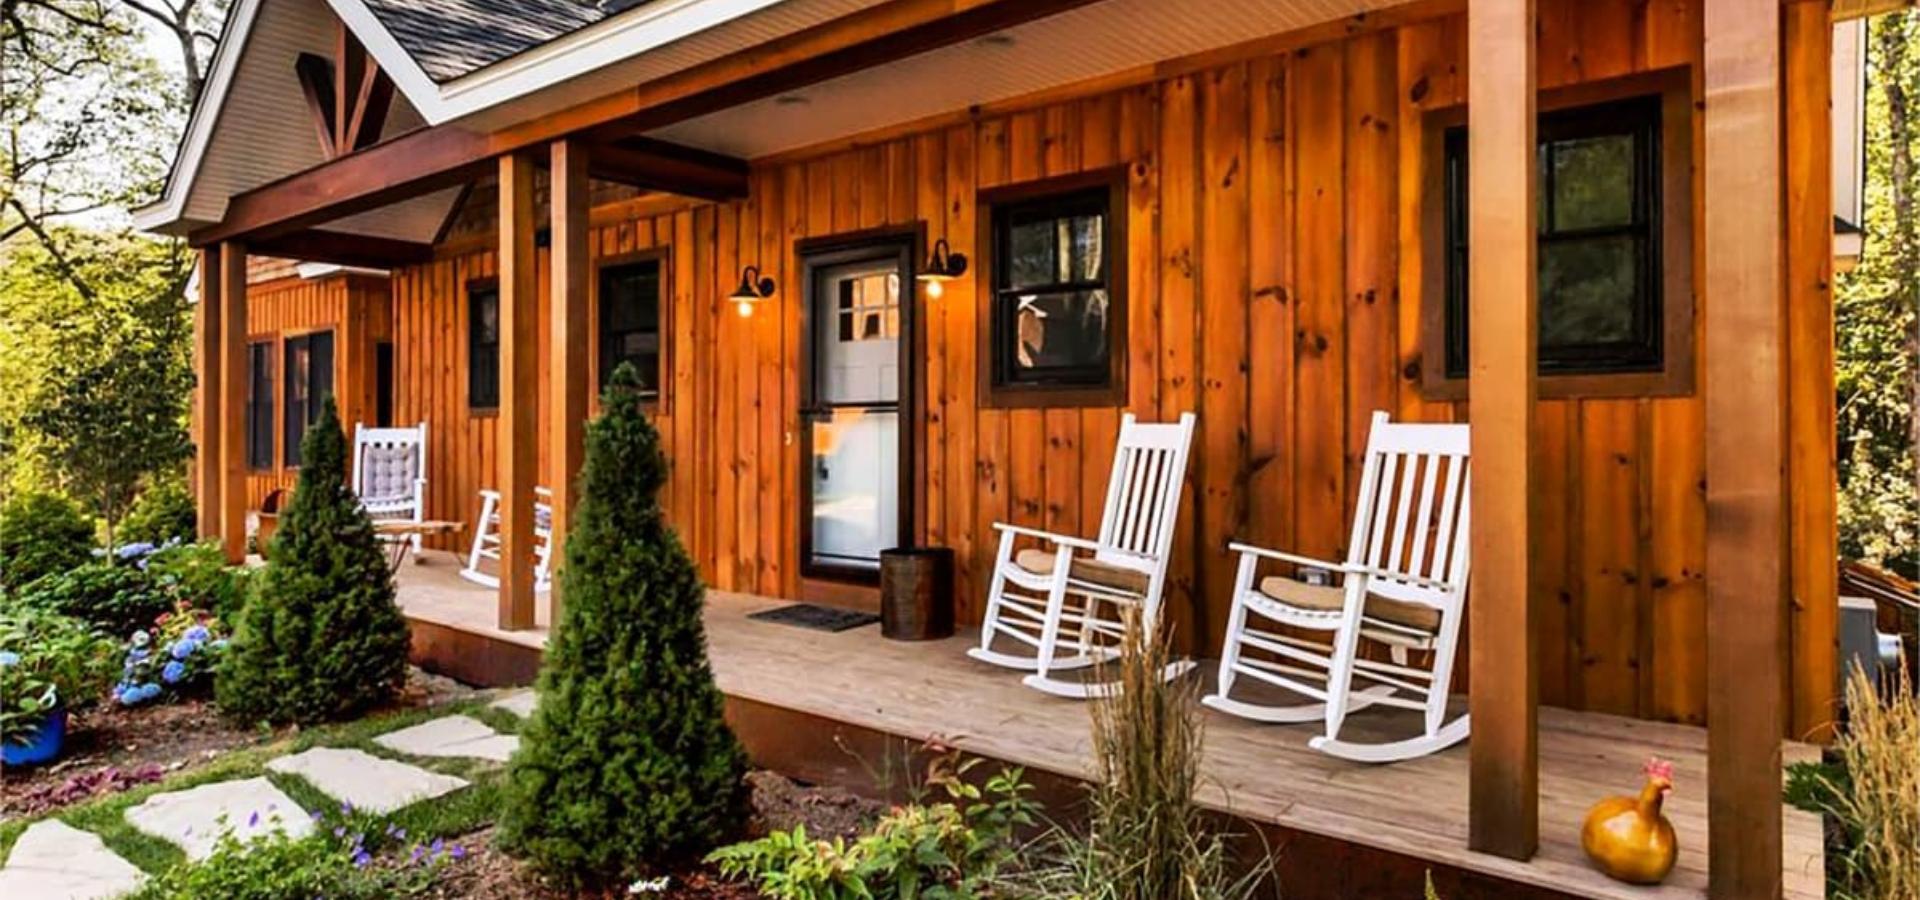 Relax in the comfort of The Preserve Resort & Spa's rustic cabin porch